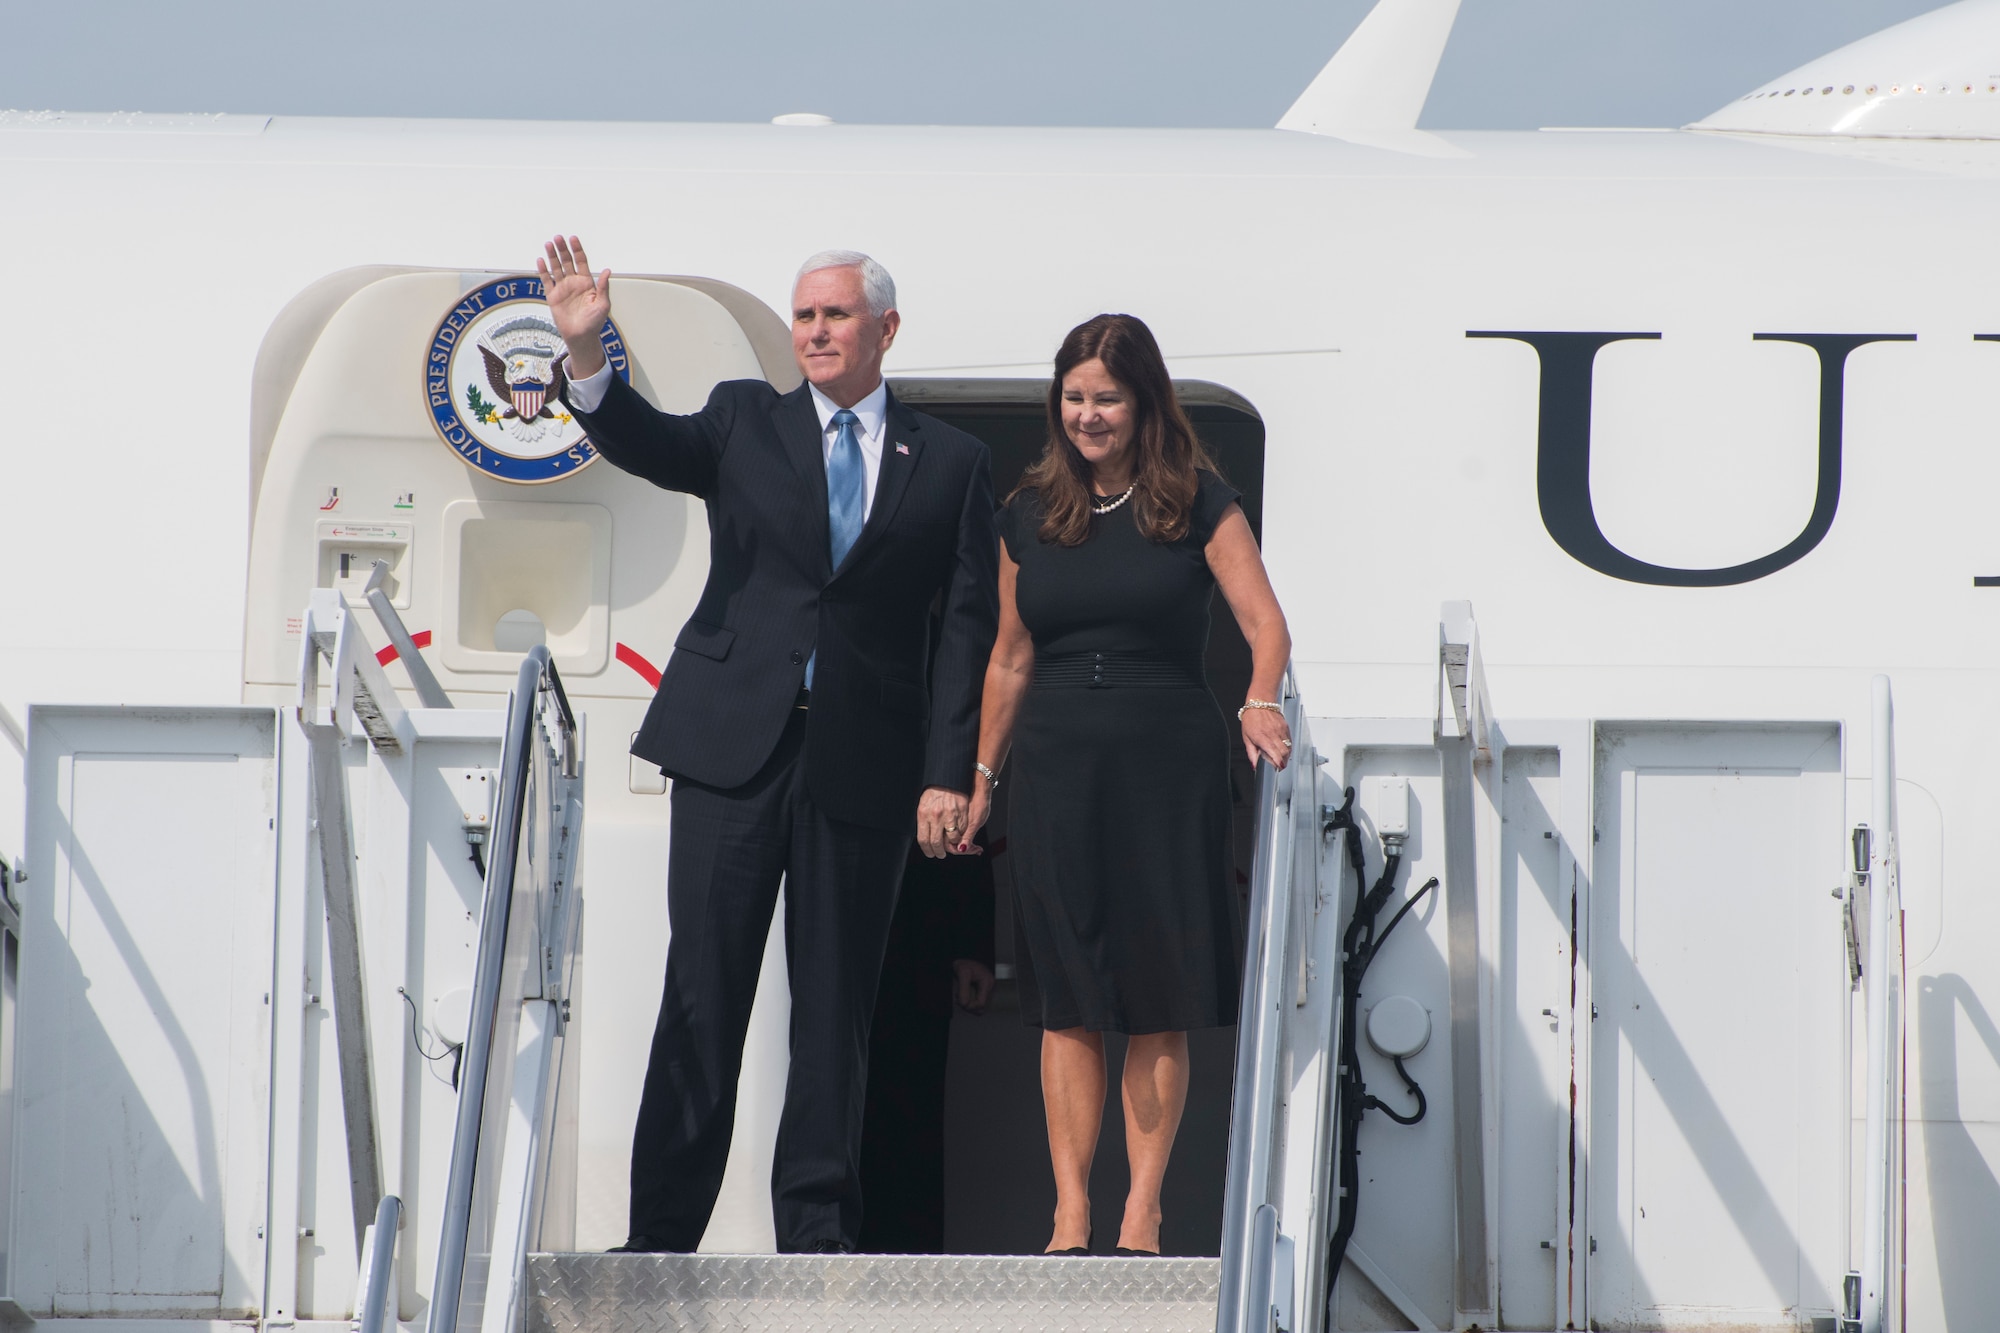 Vice President Michael Pence and his wife, Karen, wave to onlookers as they disembark Air Force Two at Dobbins Air Reserve Base, Ga. on May 29, 2020. Air Force Two landed here around 10 a.m., marking the second time in two weeks the vice president has visited Georgia. (U.S. Air Force photo/Andrew Park)